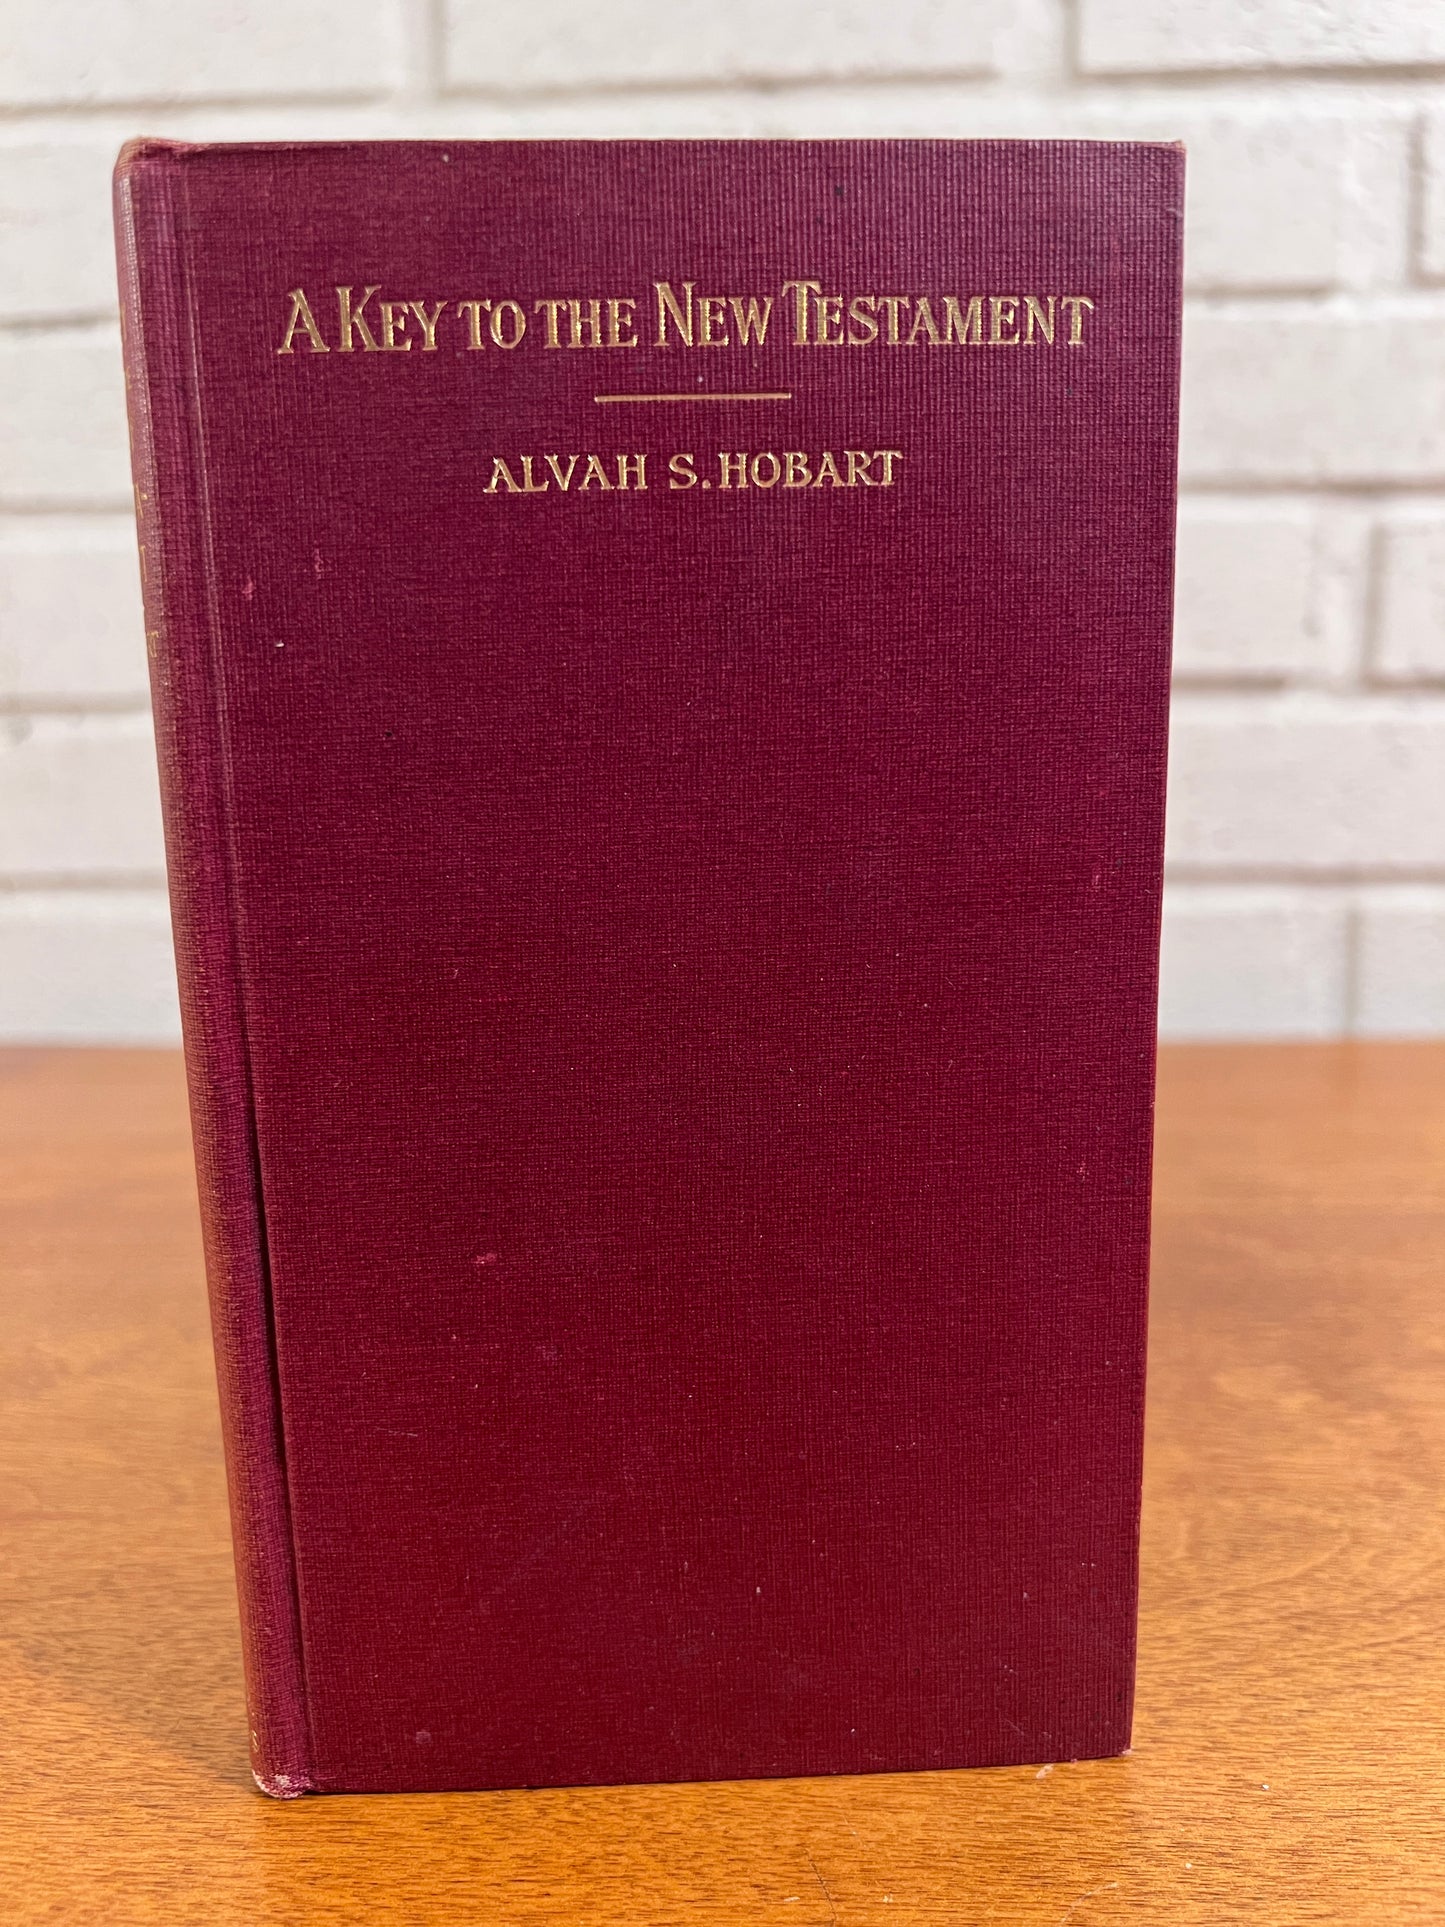 A Key to the New Testament Or Letters To Teachers Concerning the Interpretation of the New Testament by Alvah S. Hobart, 1911